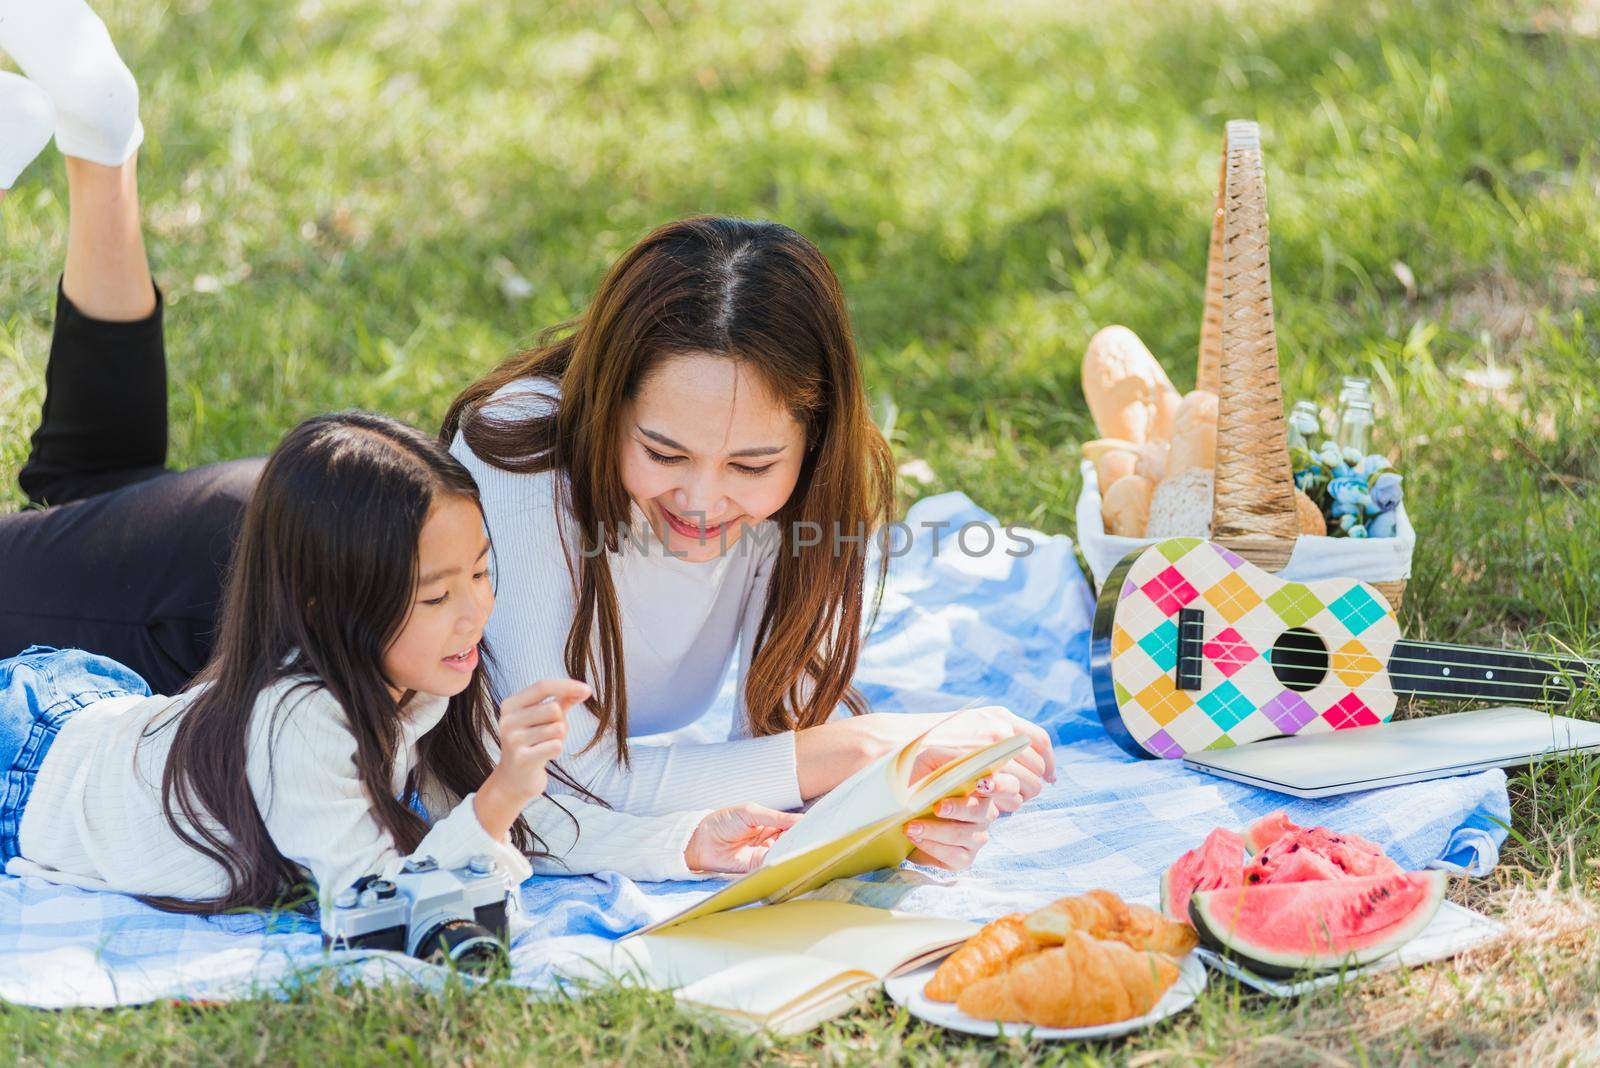 Happy family having fun and enjoying outdoor laying on picnic blanket reading book by Sorapop